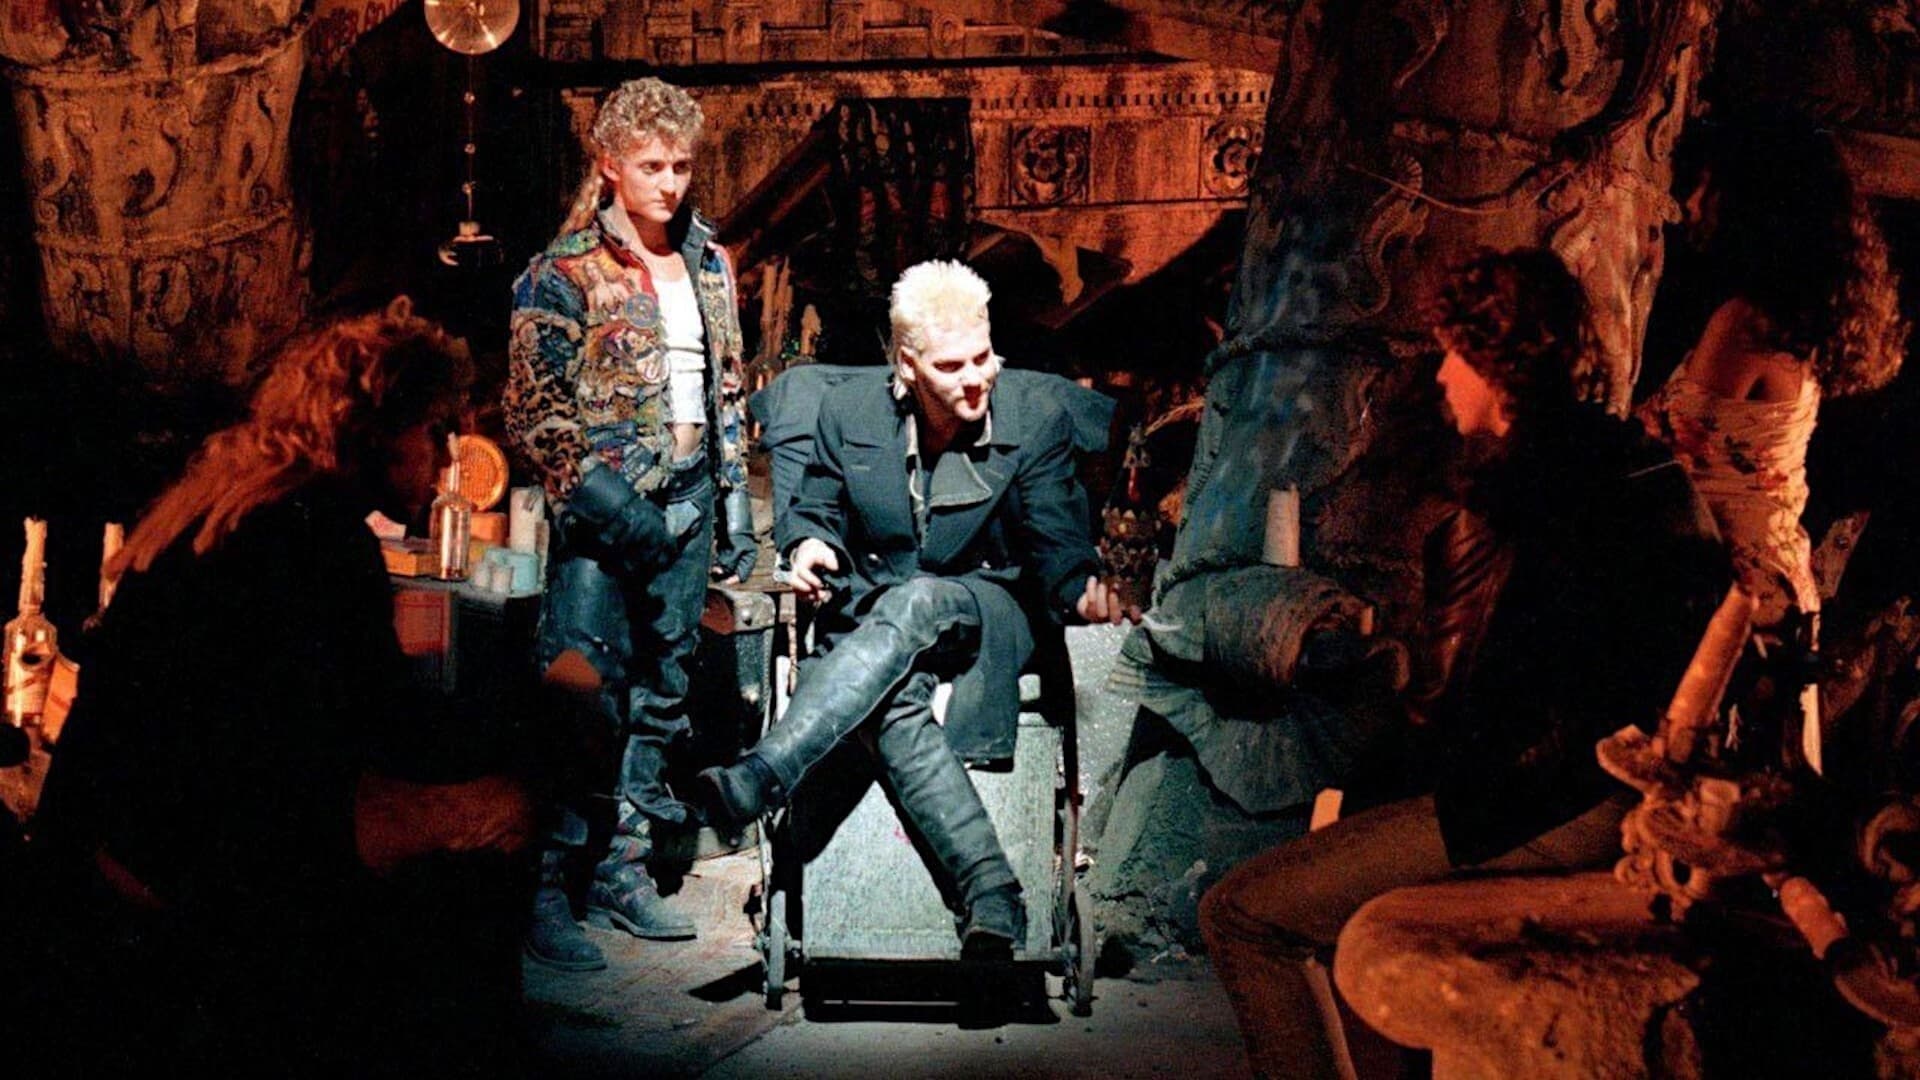 Screencap from the movie The Lost Boys of several young men with mullets and 80s hairstyles in extravagant cothing sitting in a cave. They are gathered around one of them who is illuminated by light.